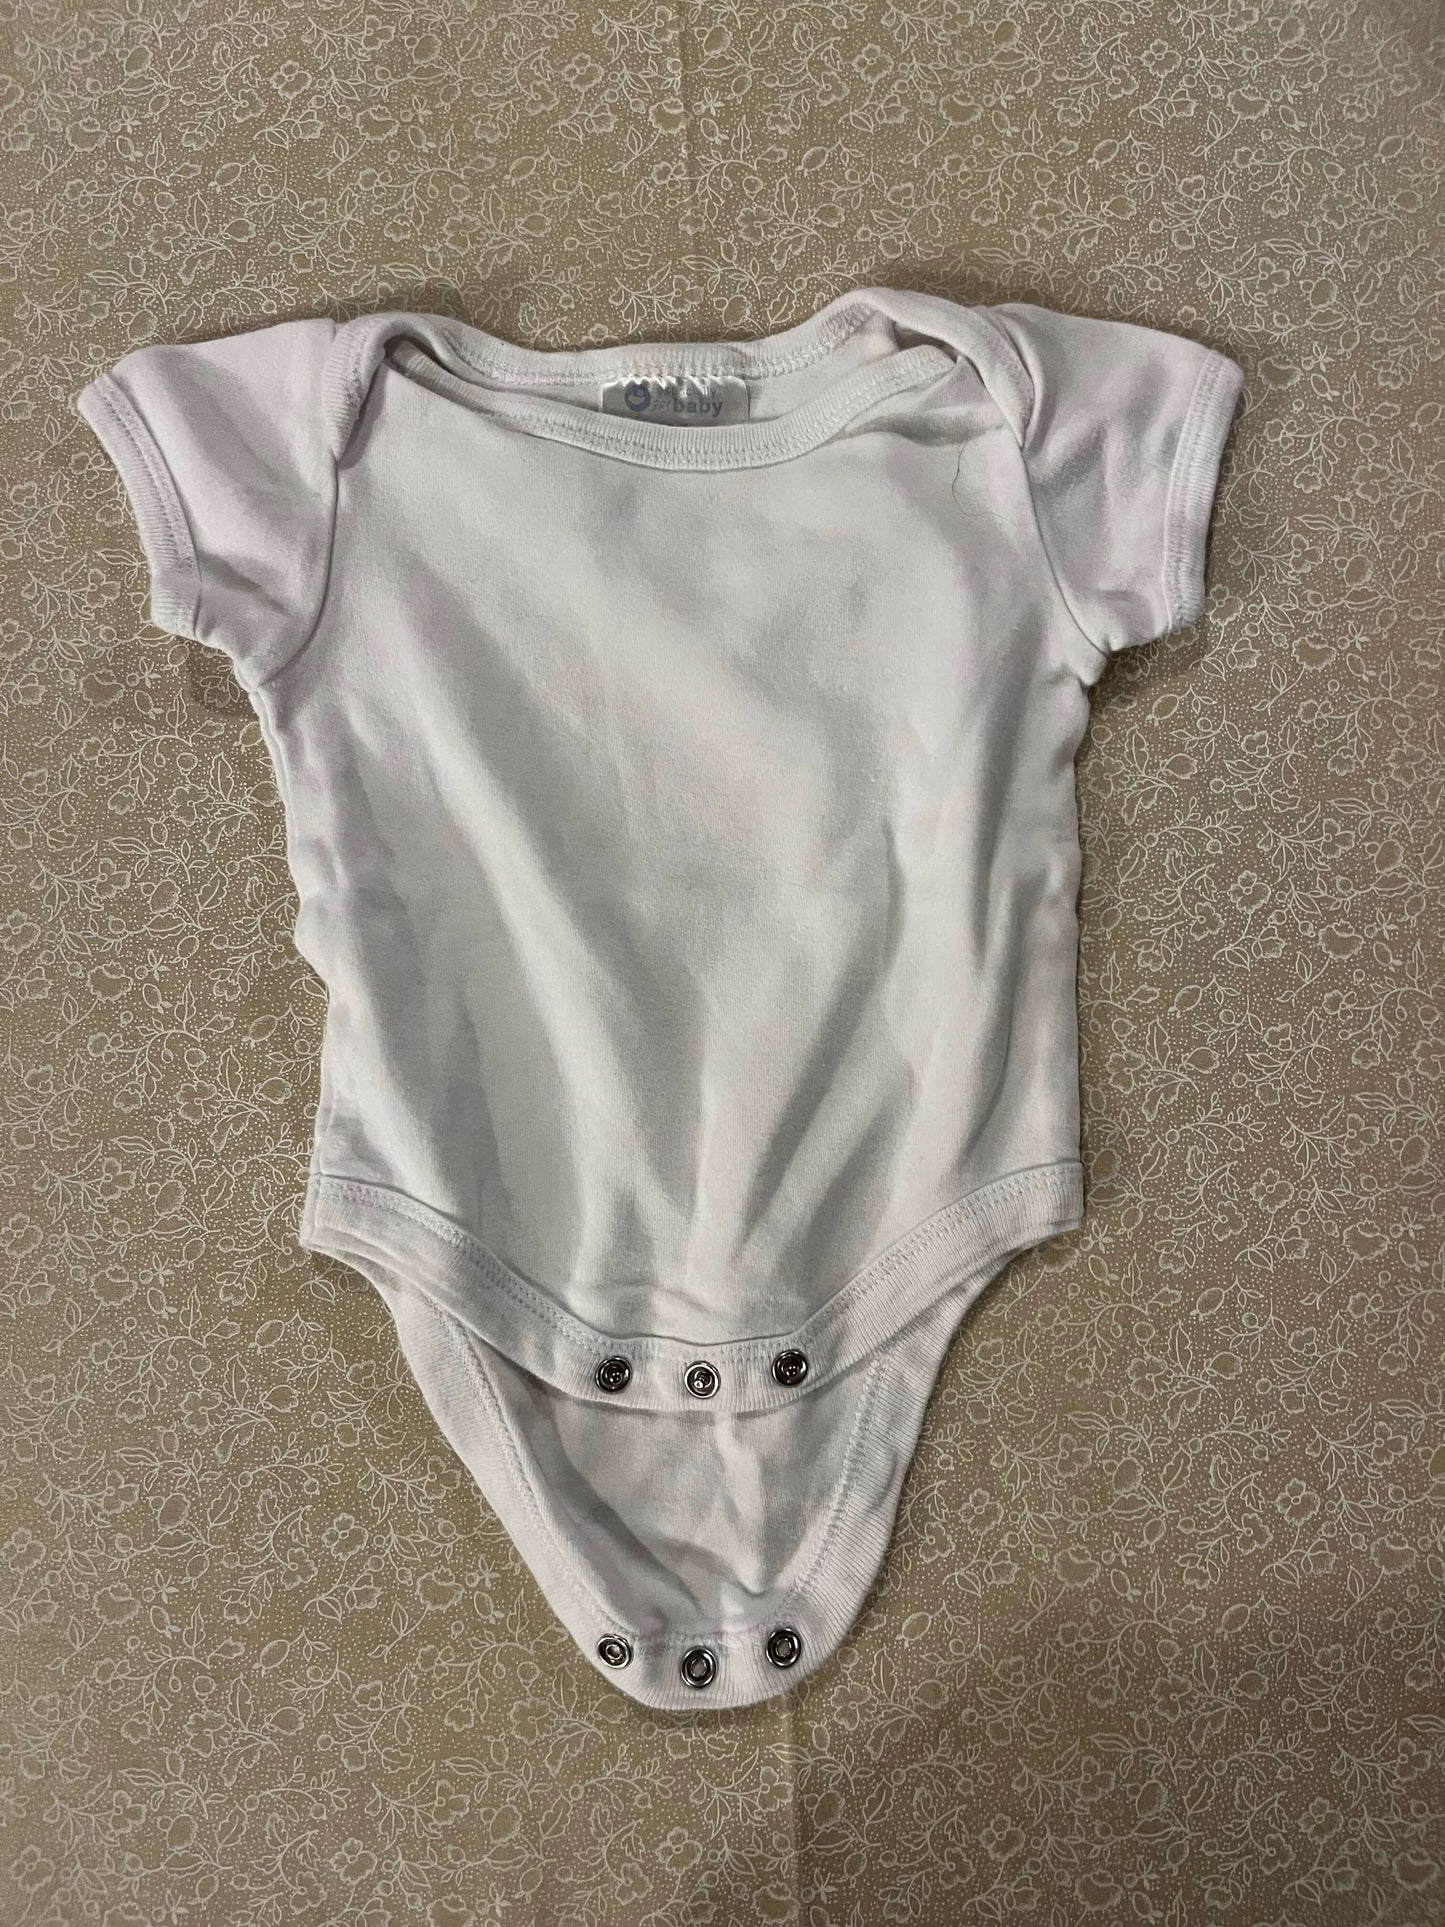 3-6-month-shirt-especially-for-baby-tshirt-white